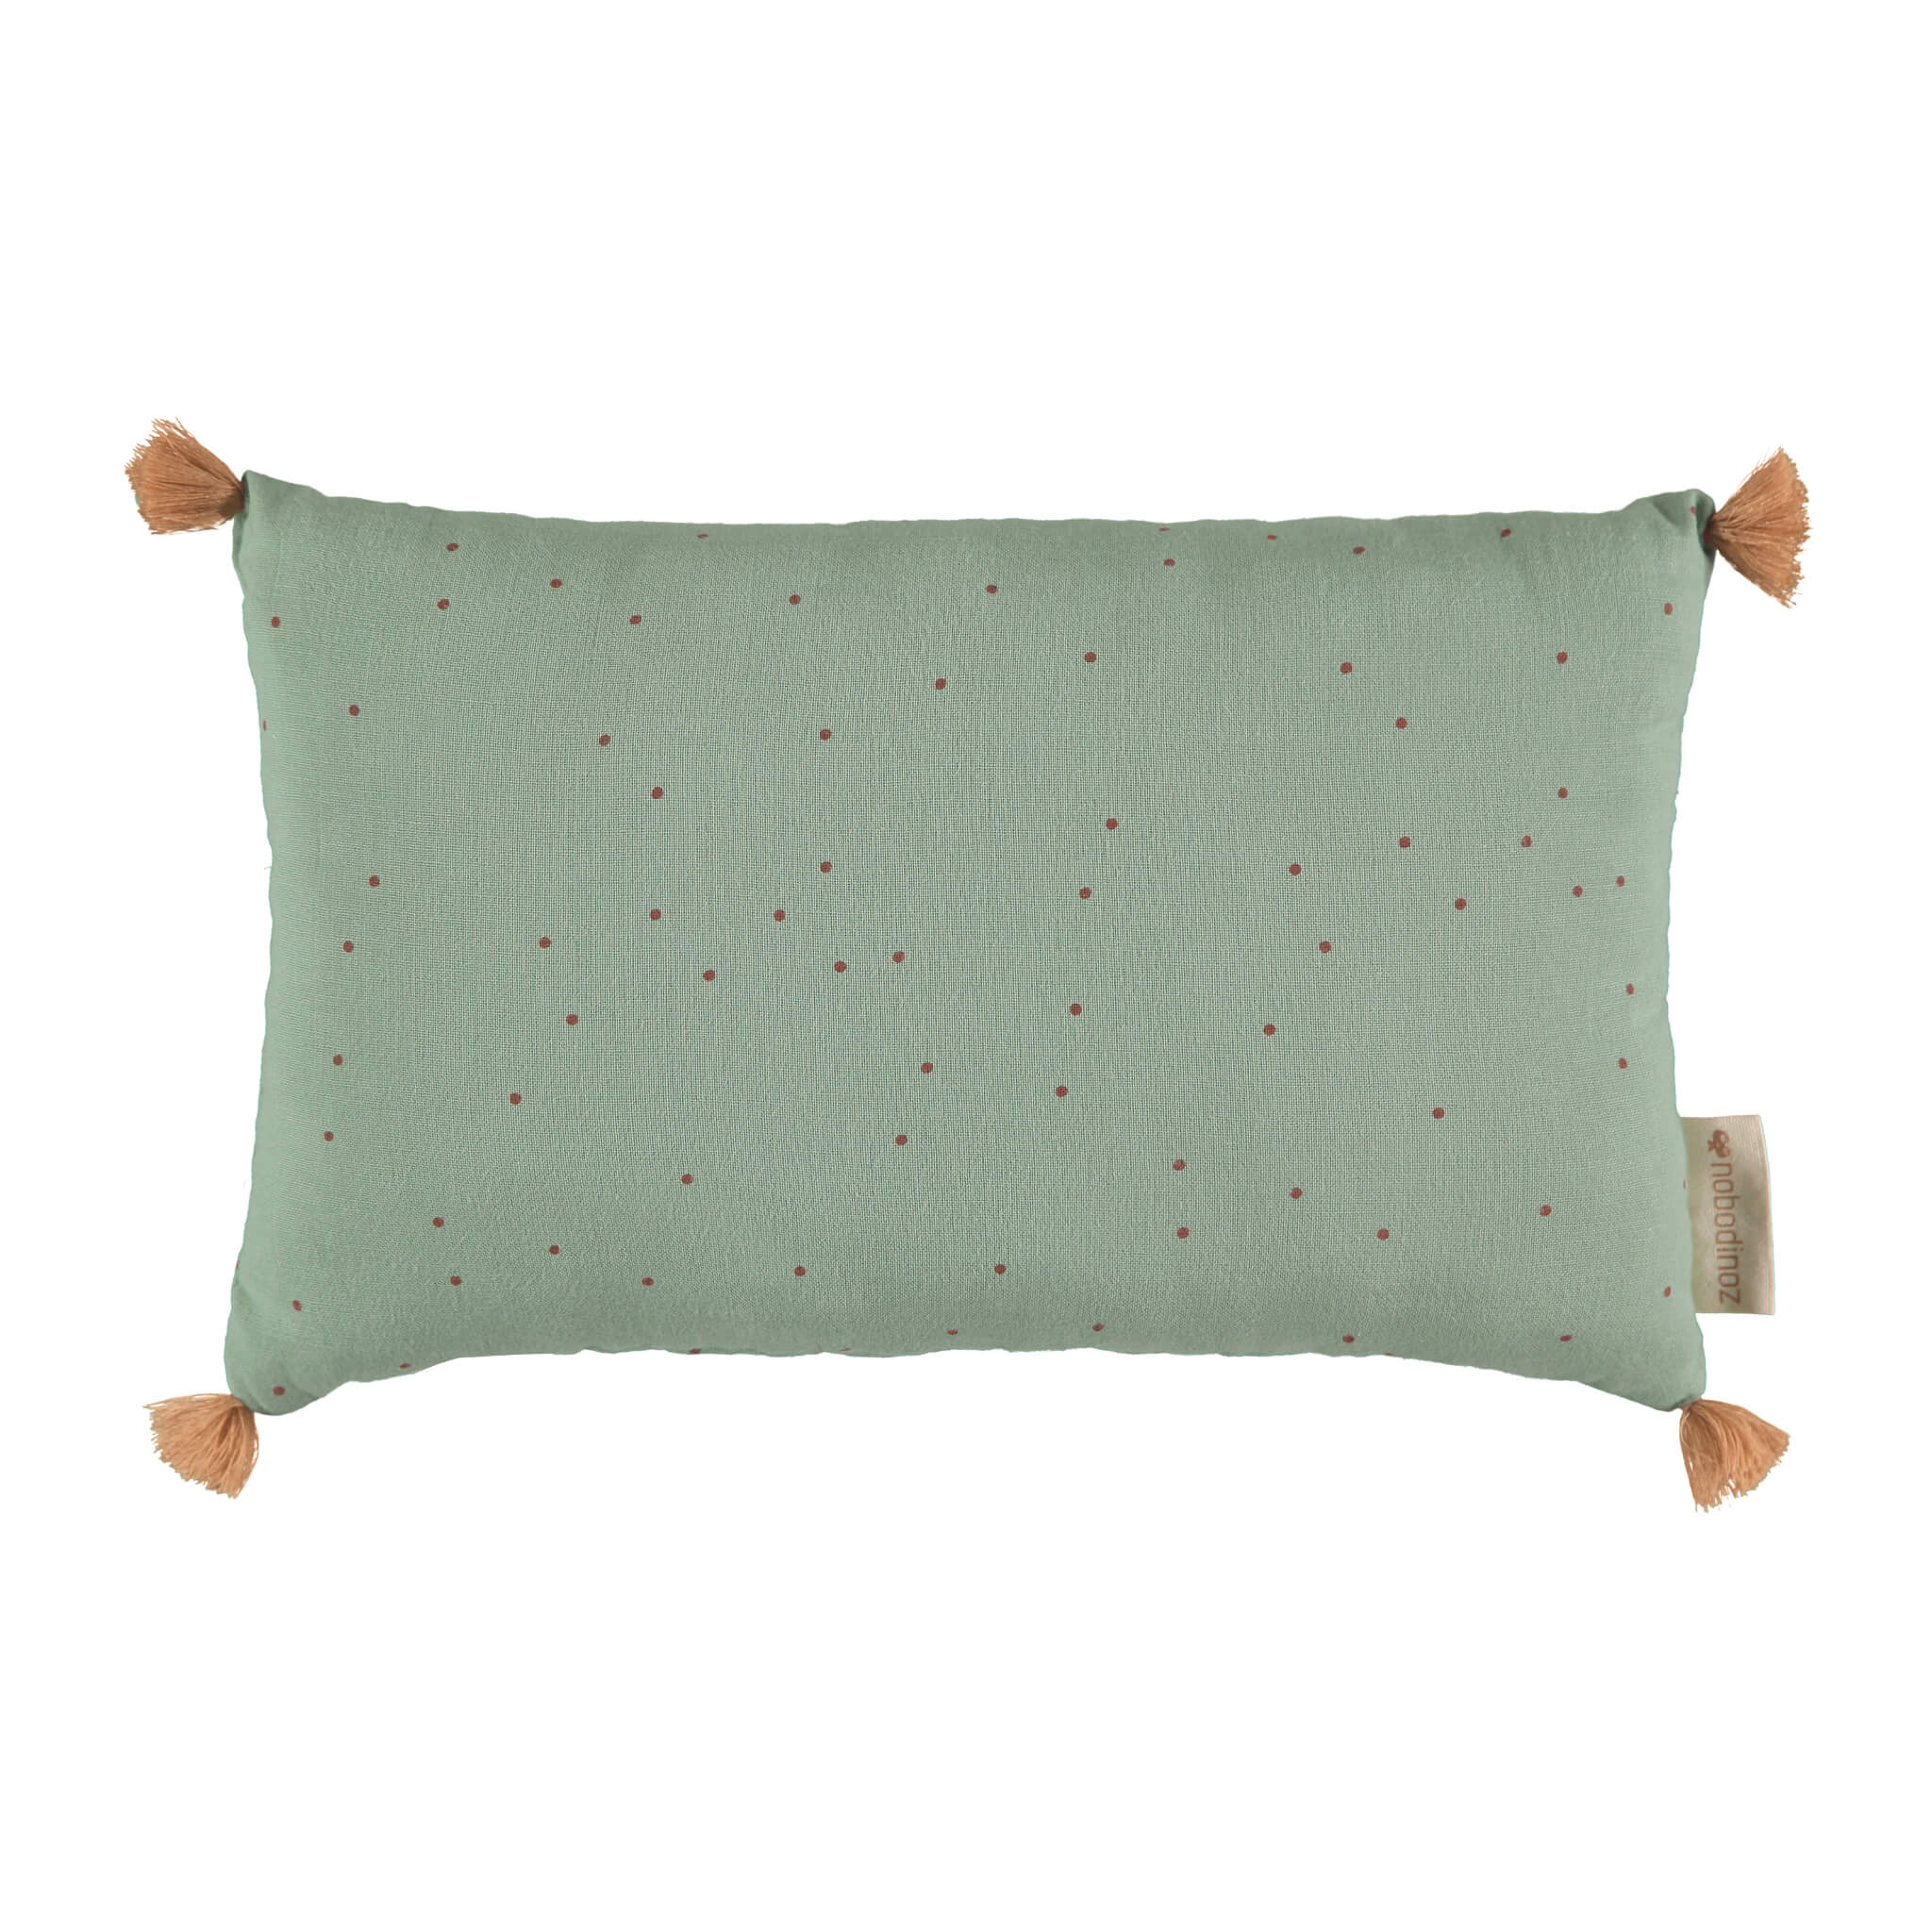 Sublim Cushion - Sweet Toffee Dots/ Eden Green